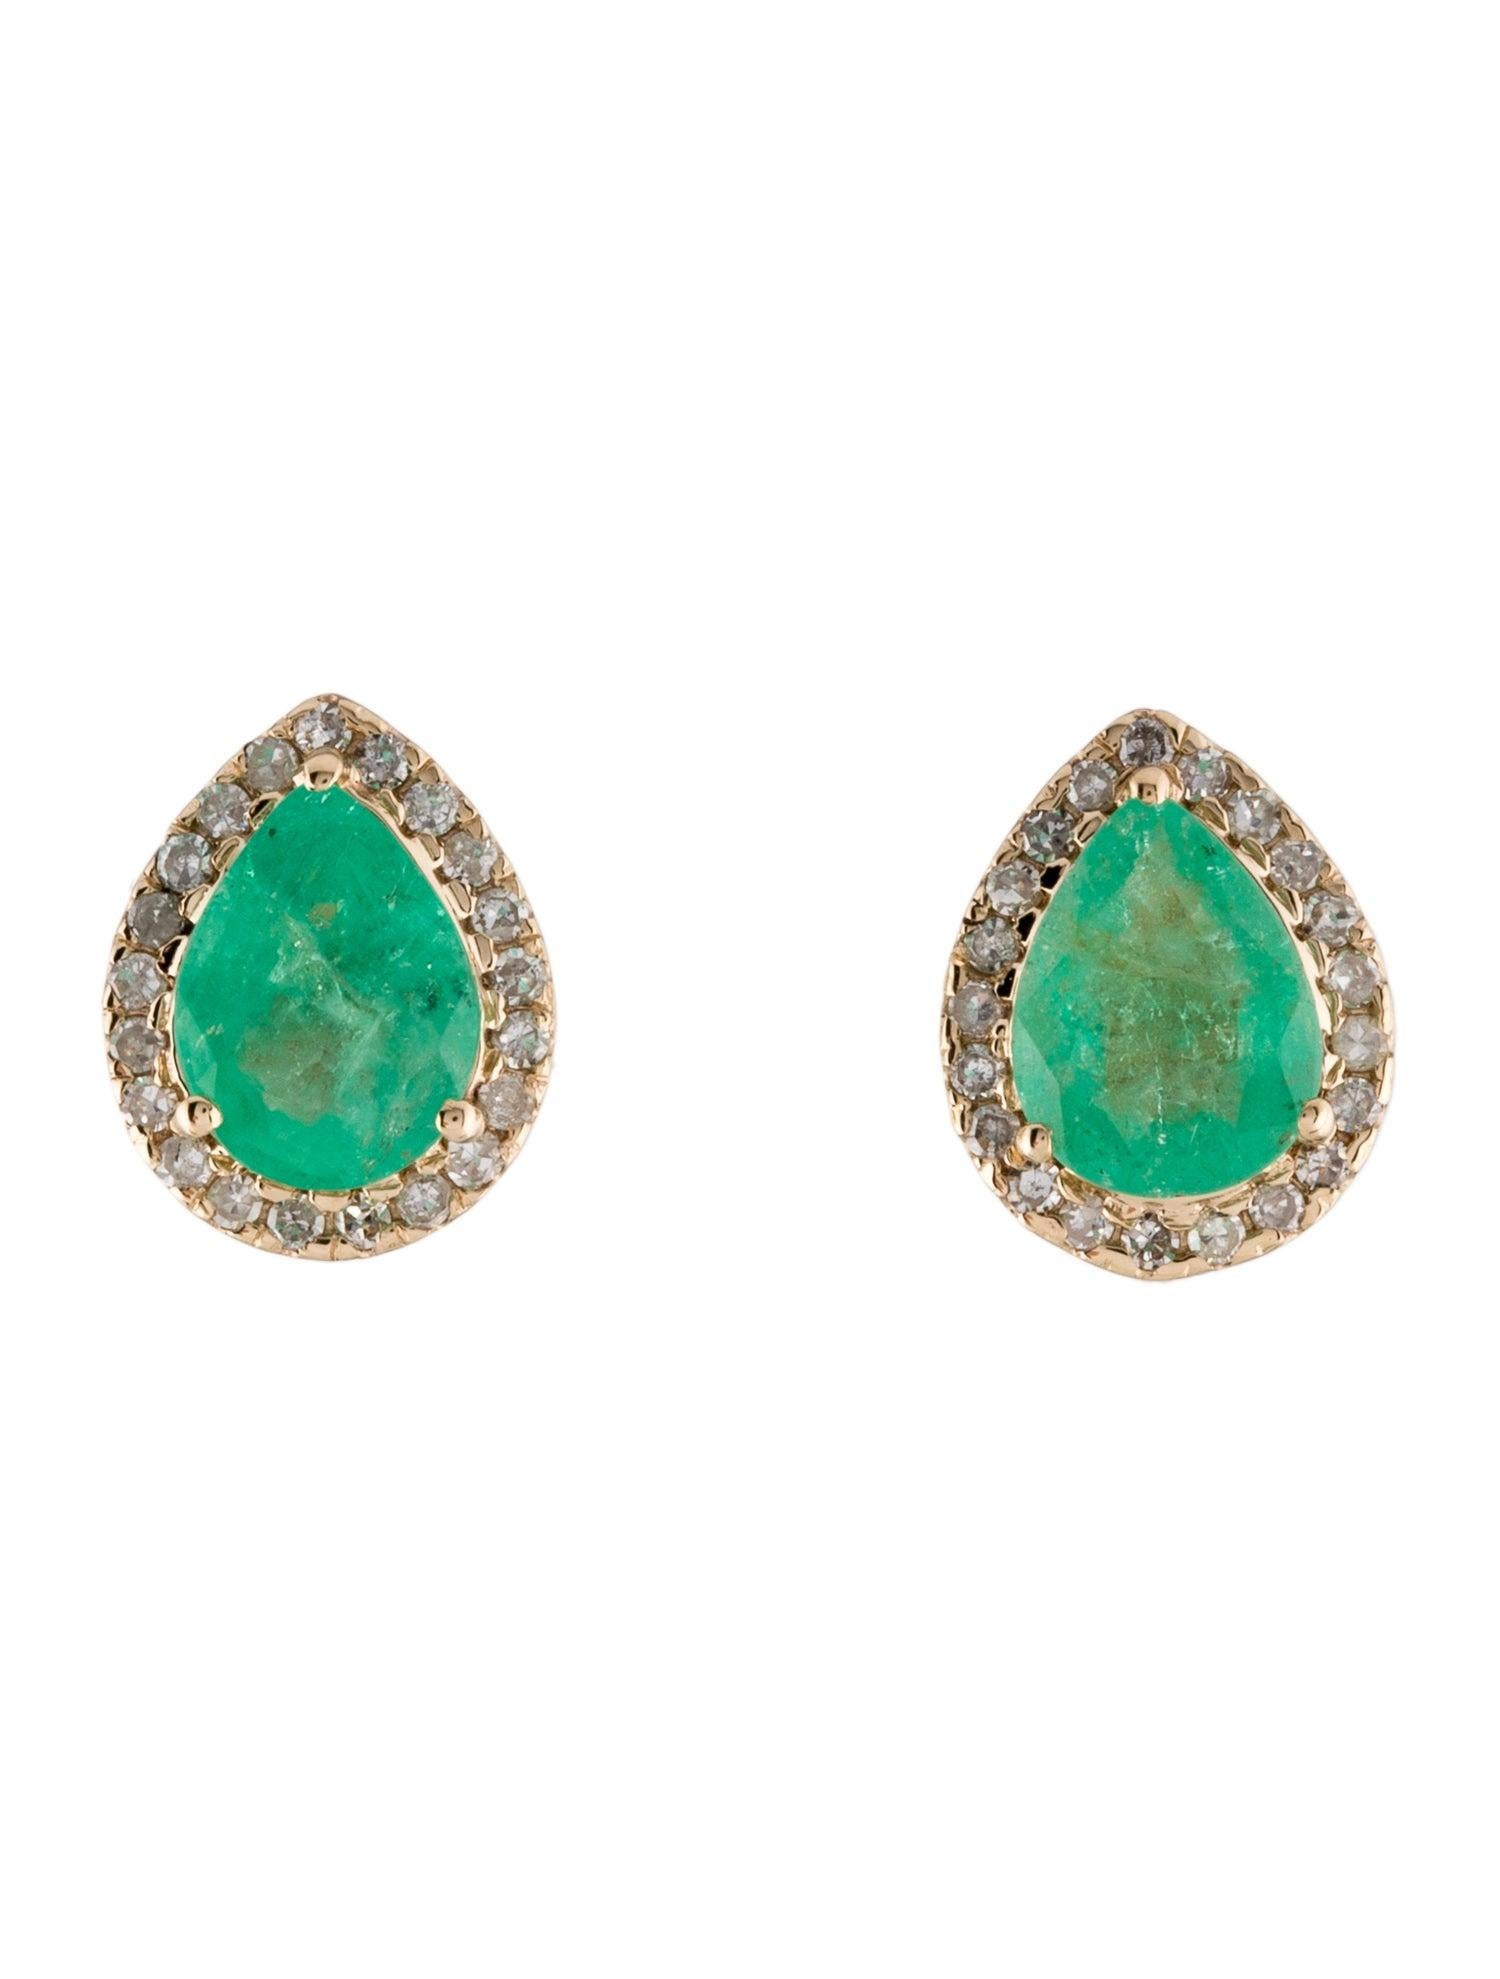 Introducing our sophisticated 14K Yellow Gold Stud Earrings, each adorned with a stunning 1.88 carat faceted pear-shaped Emerald, framed by forty-two near colorless, single-cut Diamonds totaling 0.26 carats. These earrings epitomize elegance,